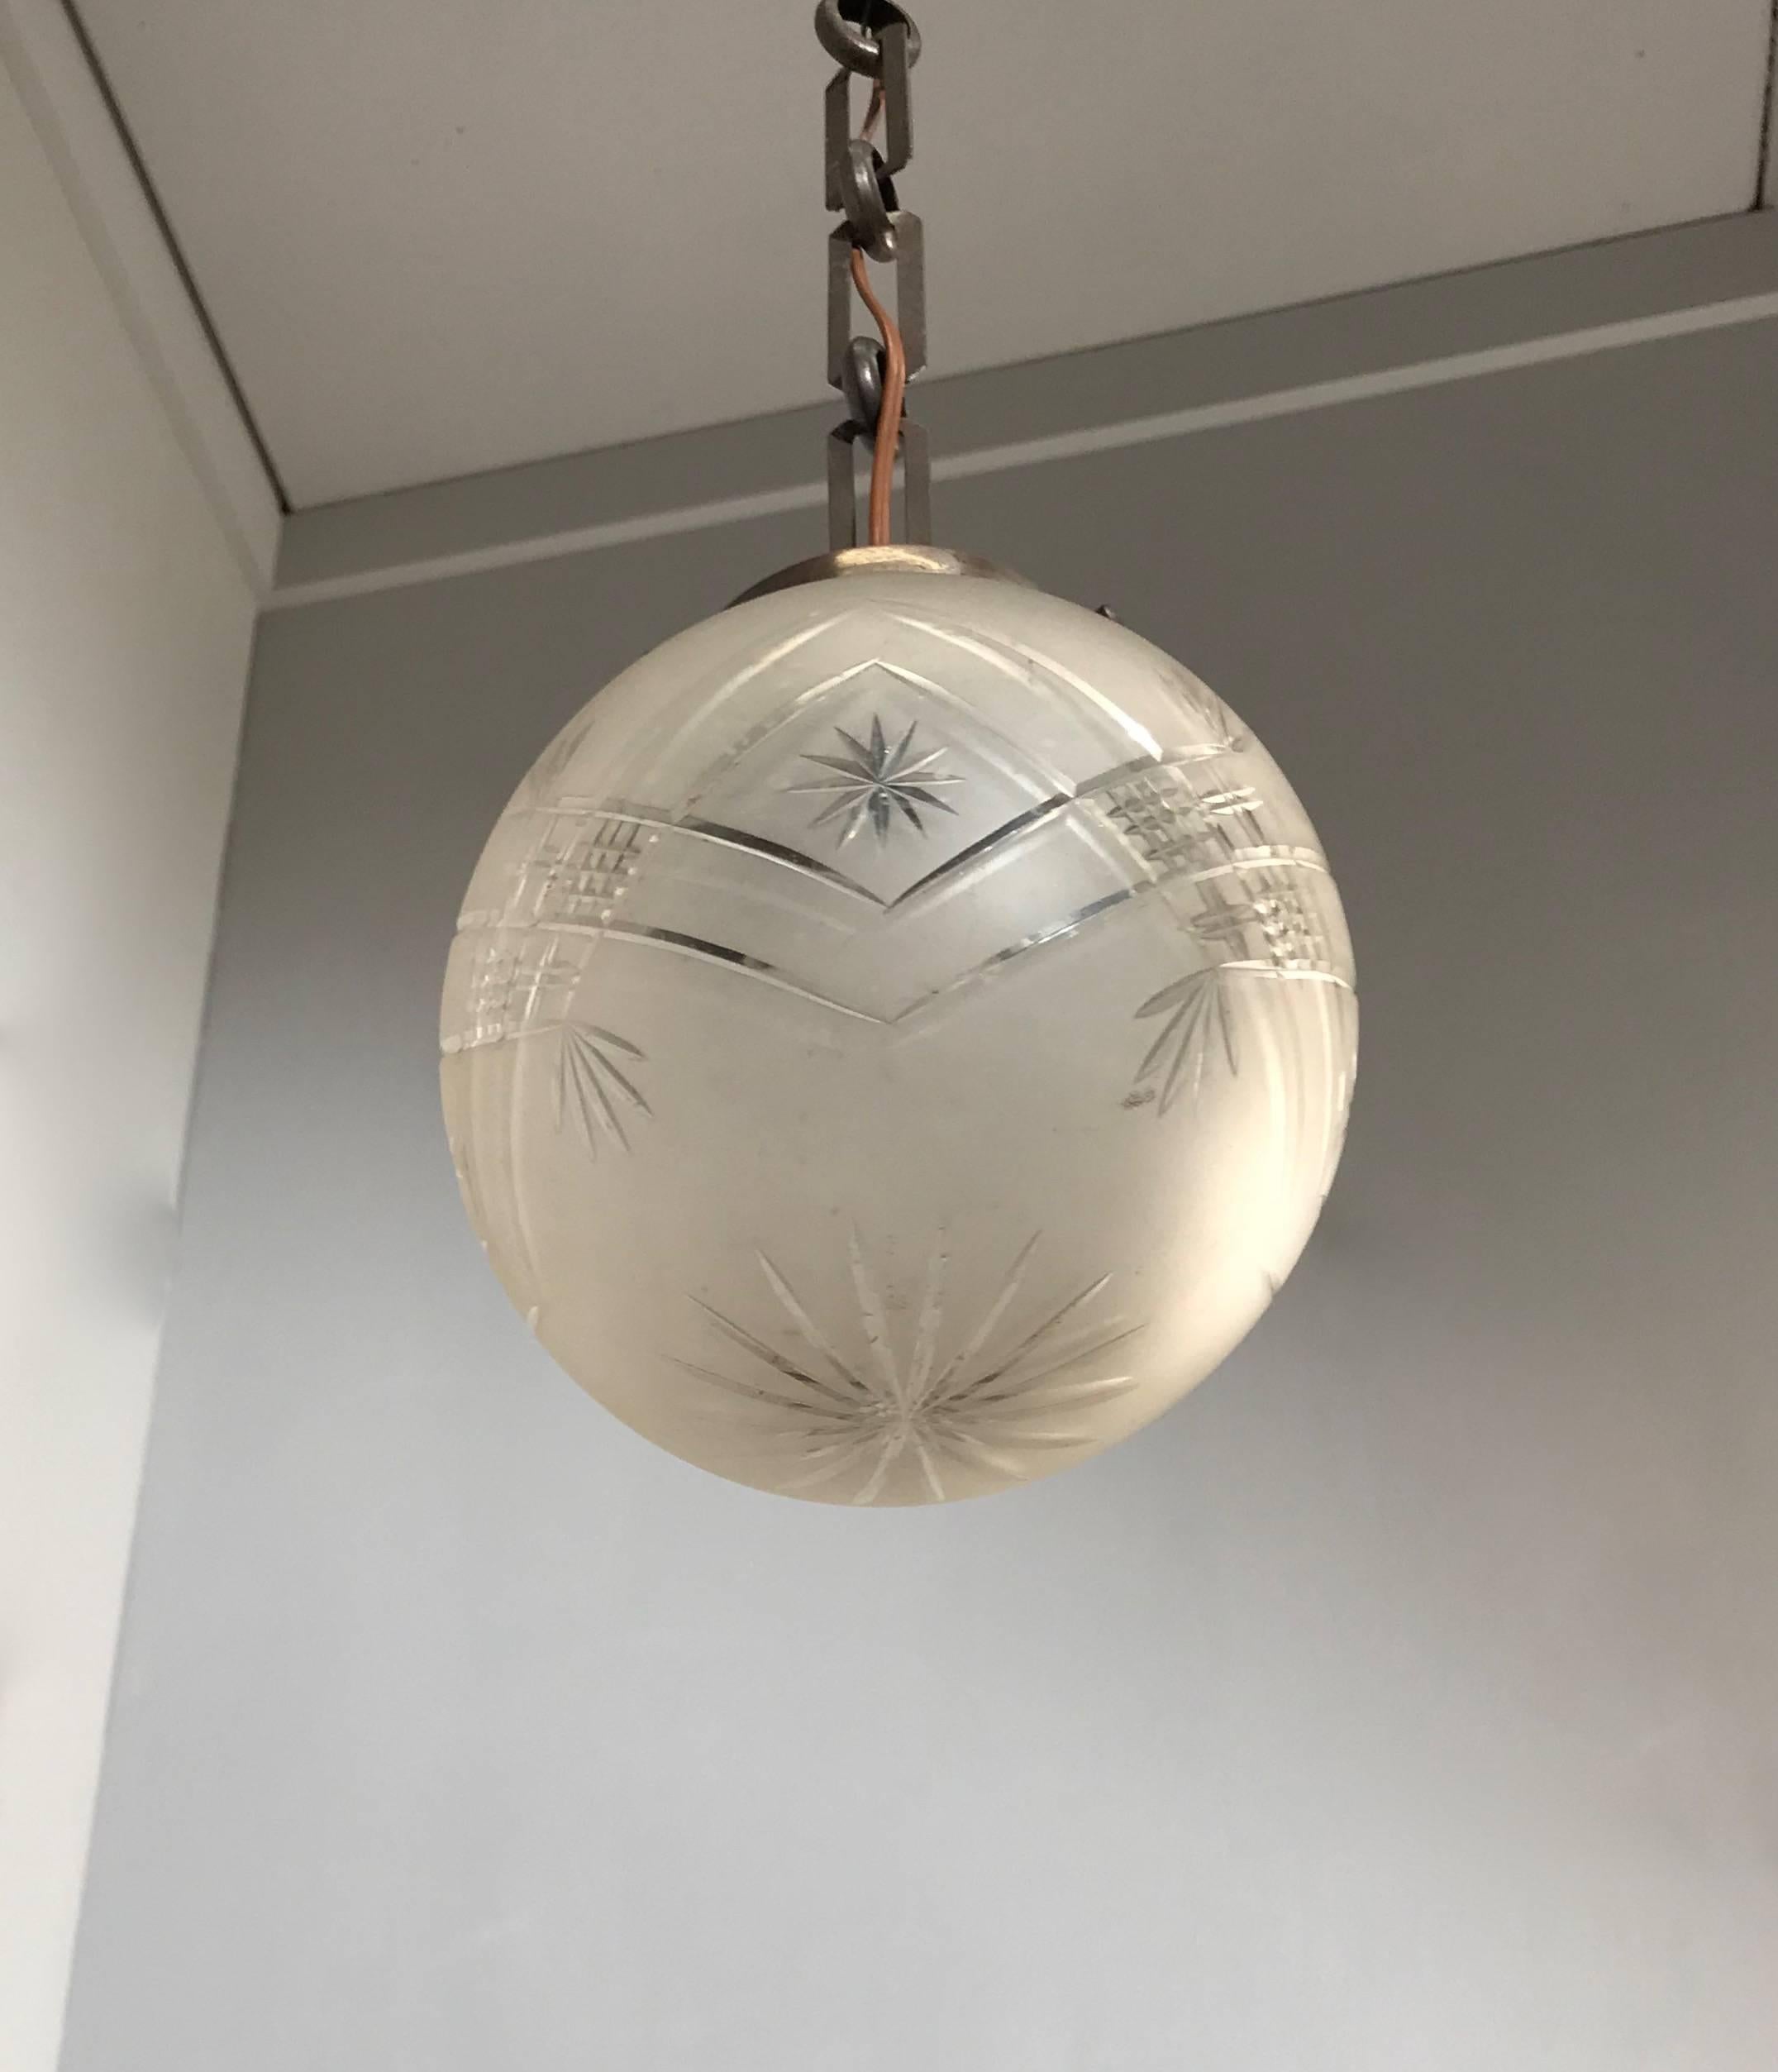 Engraved Early 20th Century Brass and Hand-Cut Glass Globe Small Pendant Light Fixture